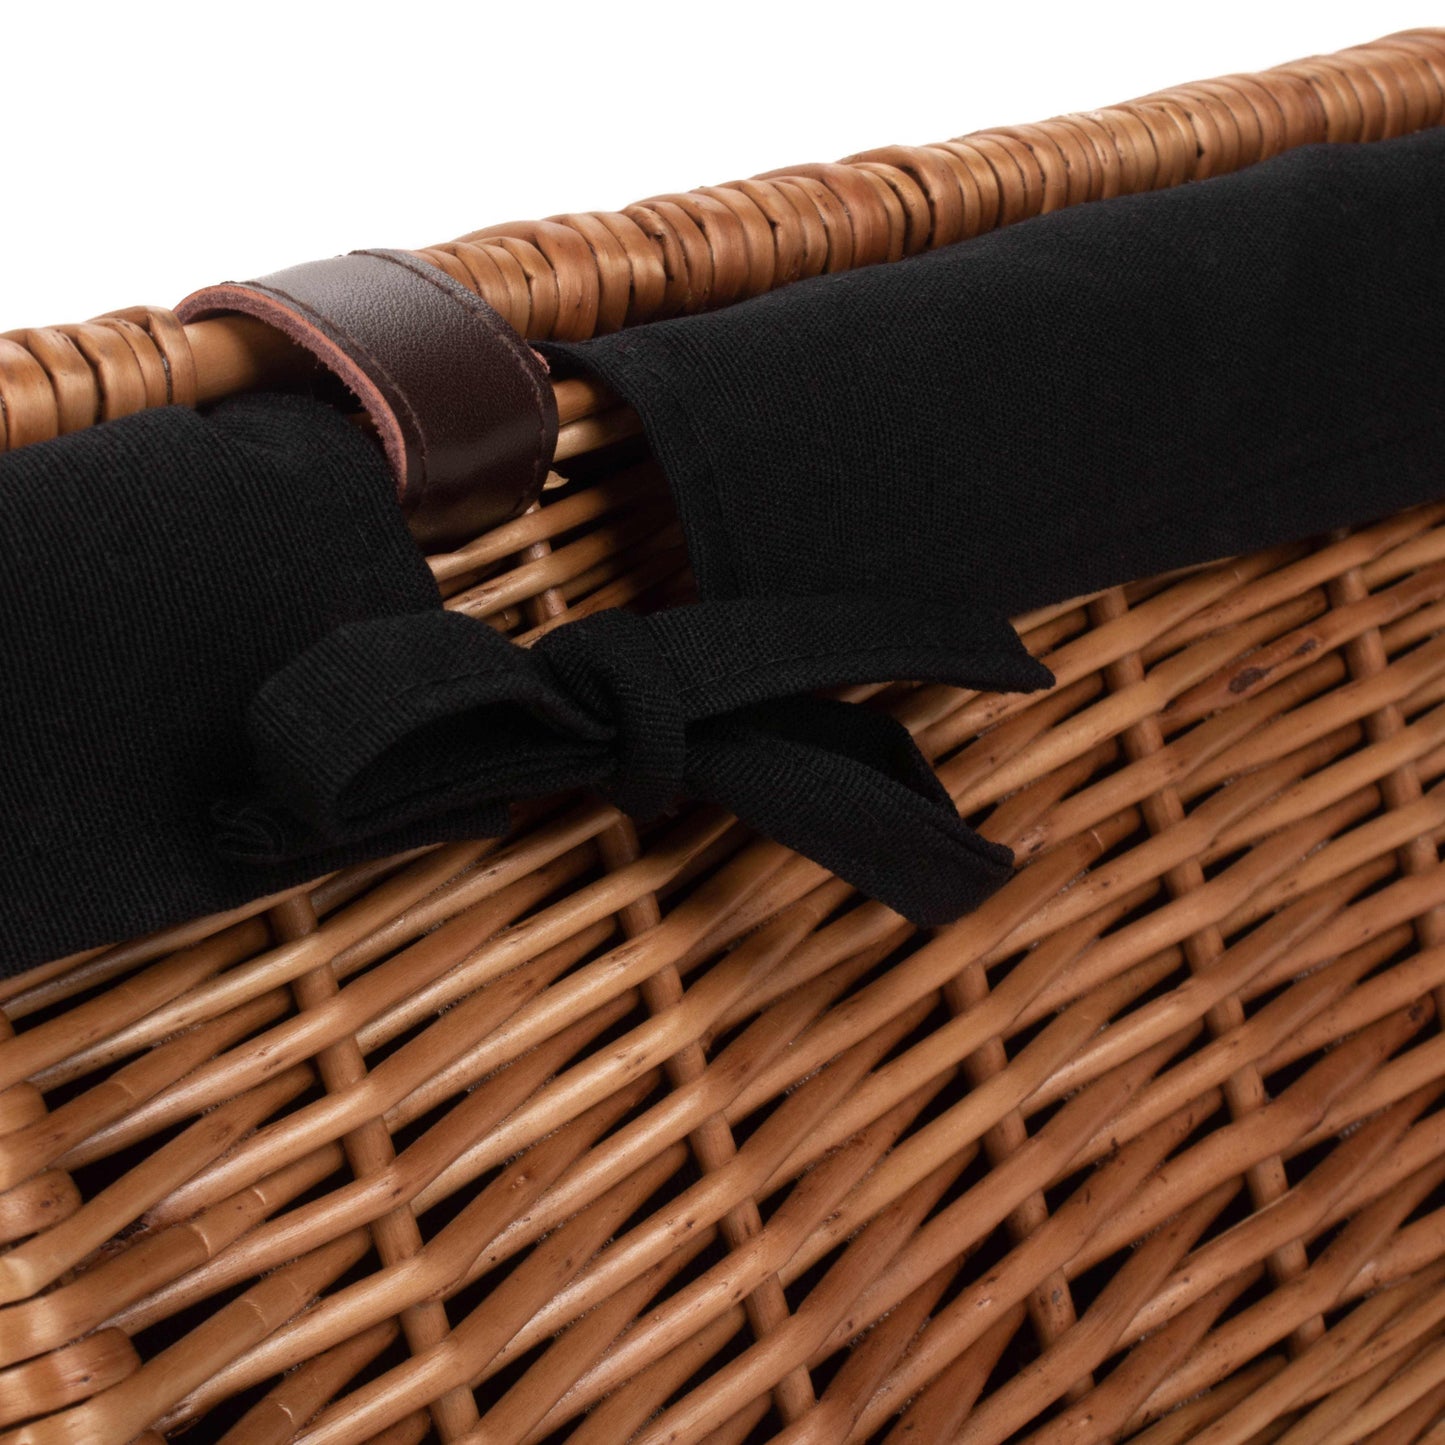 18 Inch Double Steamed Hamper With Black Lining